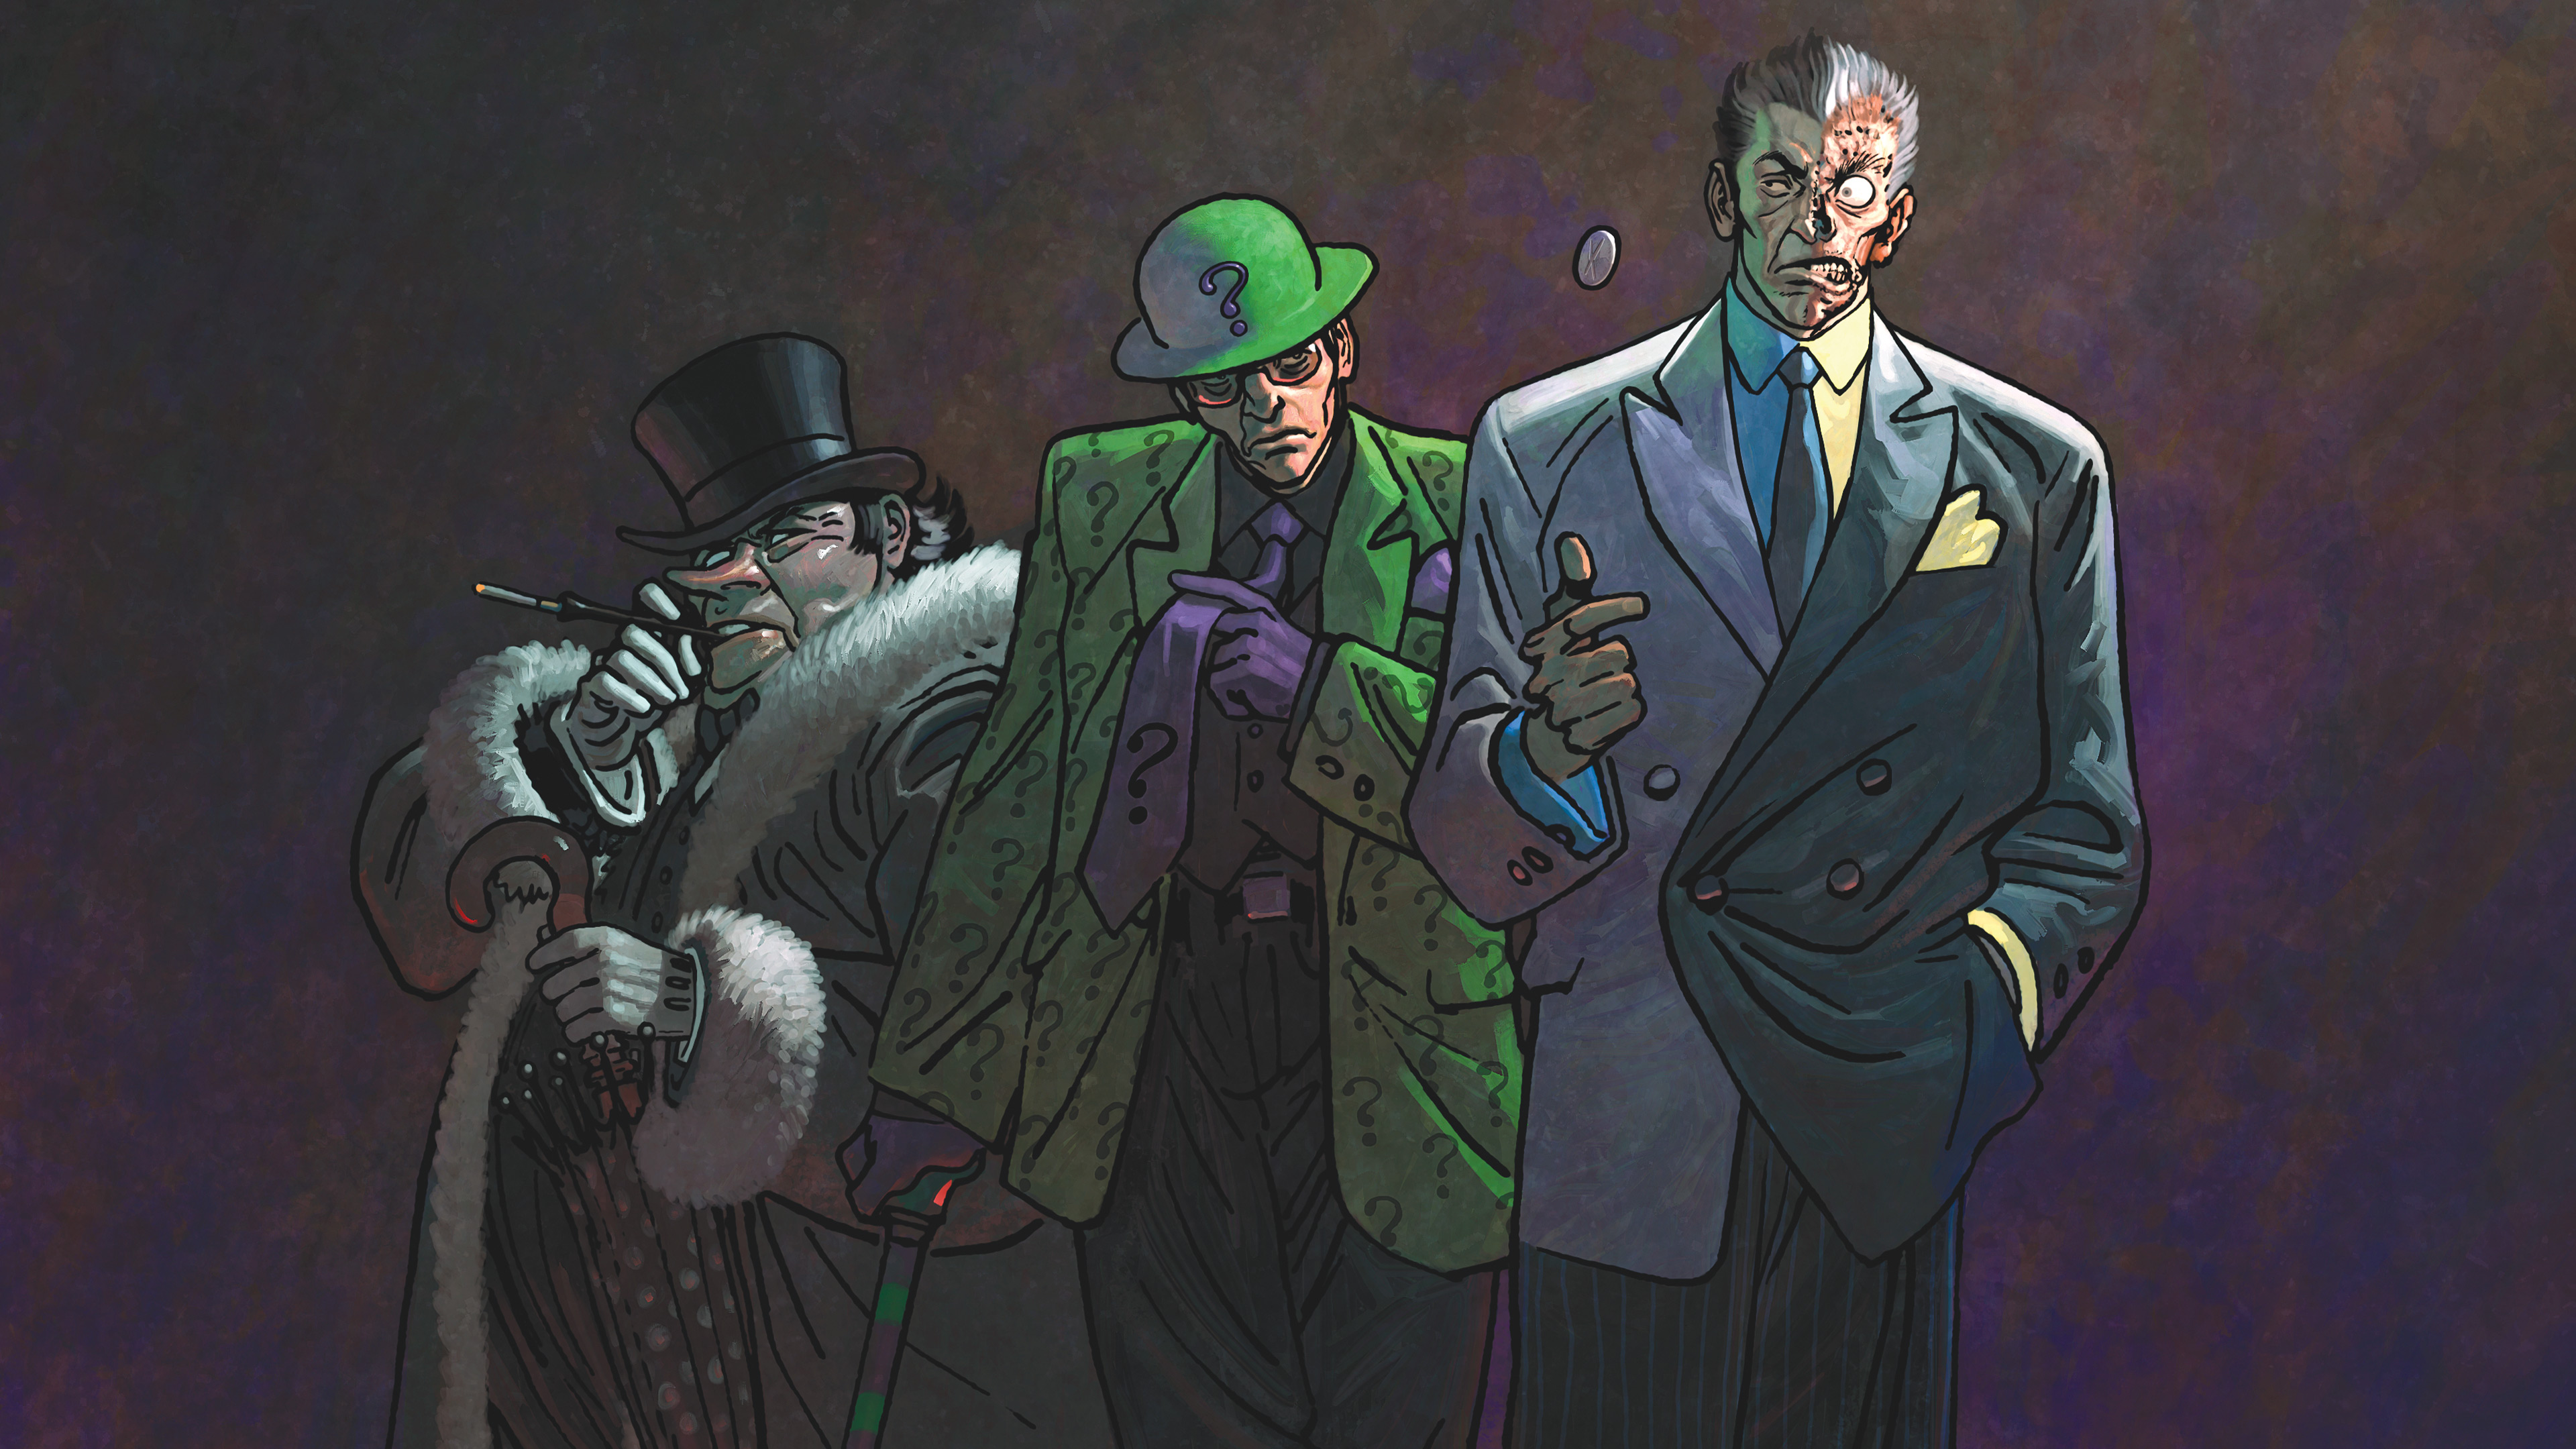 Batman villains The Riddler, The Penguin, and Two-Face by Brian